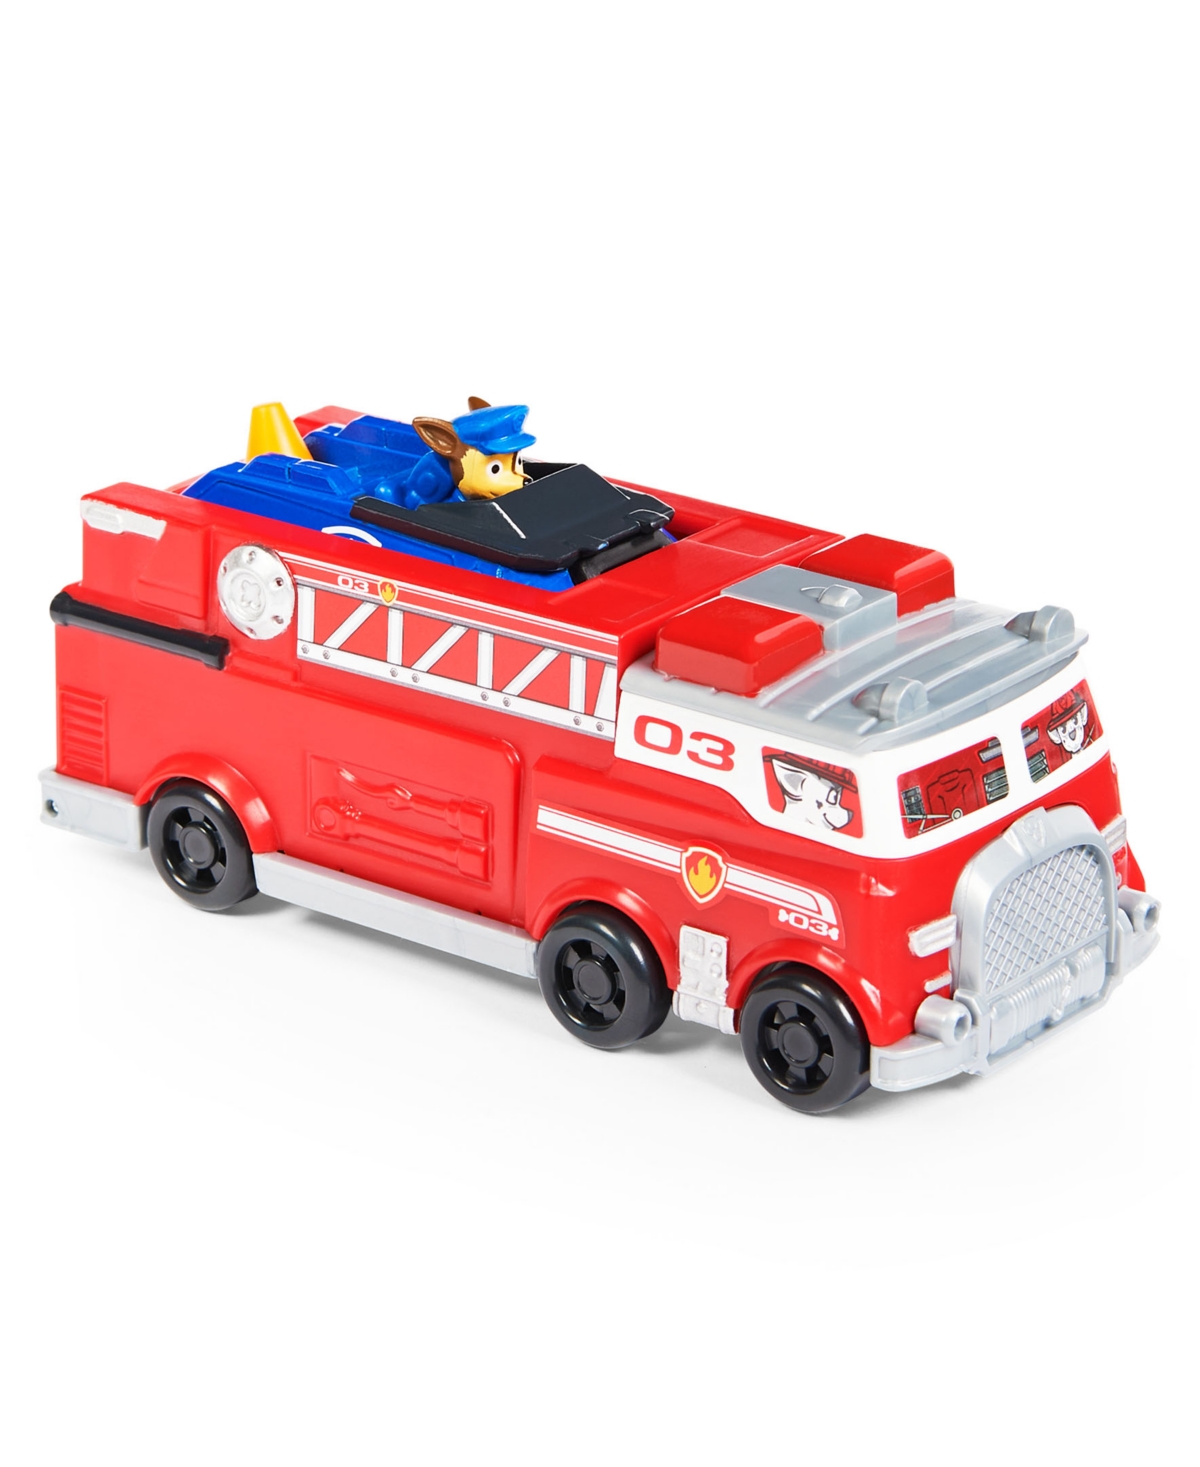 Shop Paw Patrol True Metal Firetruck Die-cast Team Vehicle With 1:55 Scale Chase In Multi-color